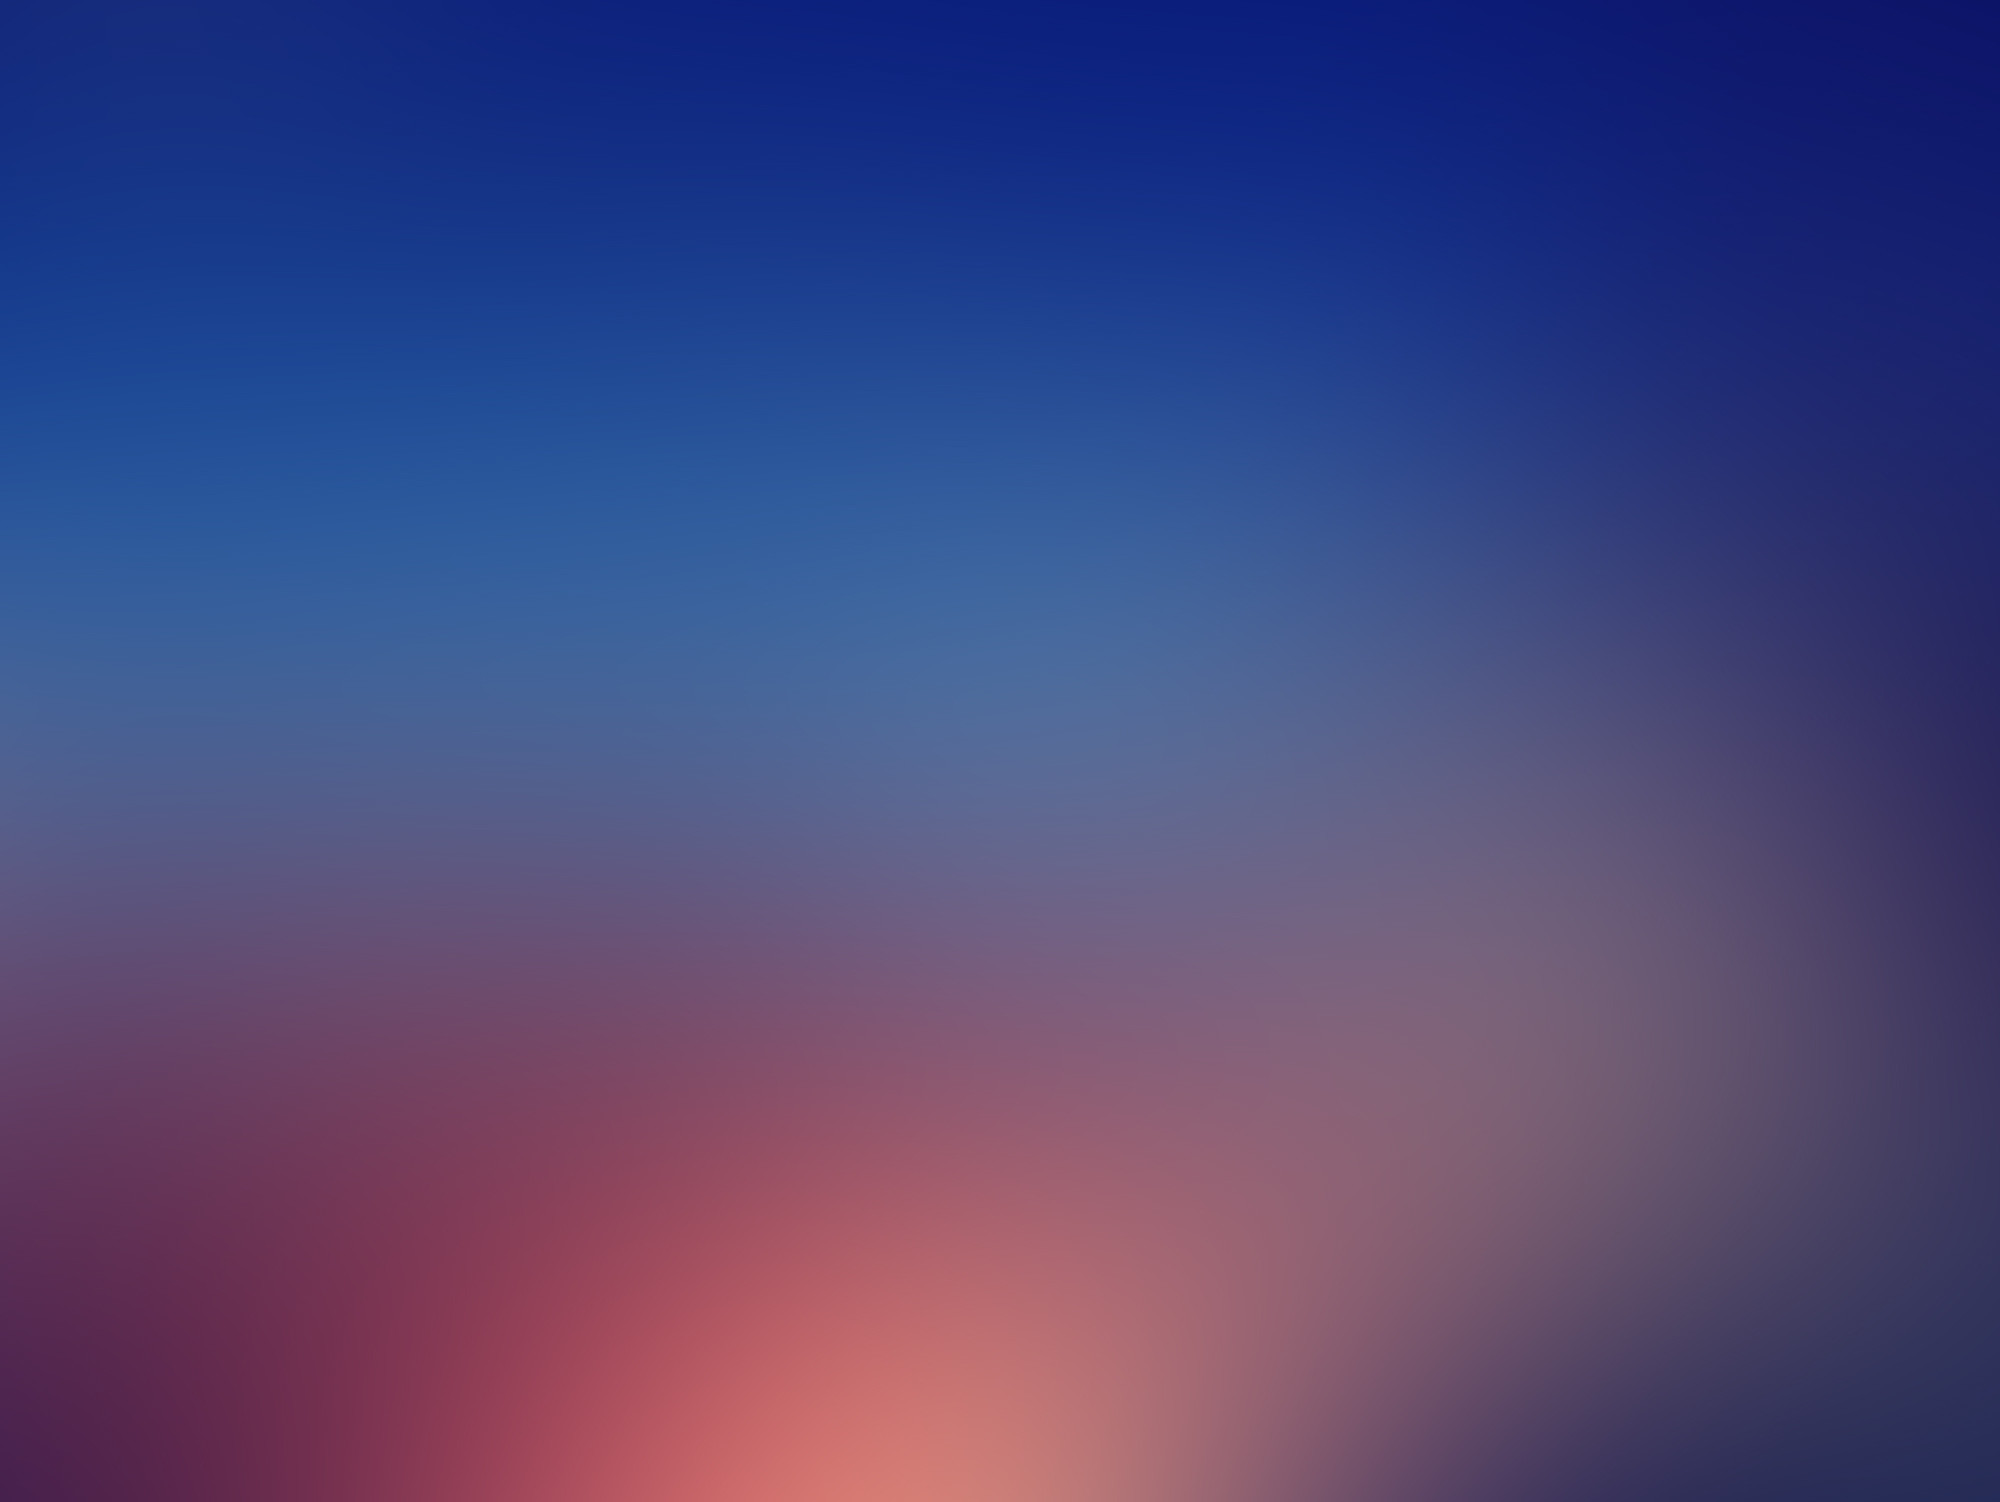 Free HD Solid Color Wallpaper Download.